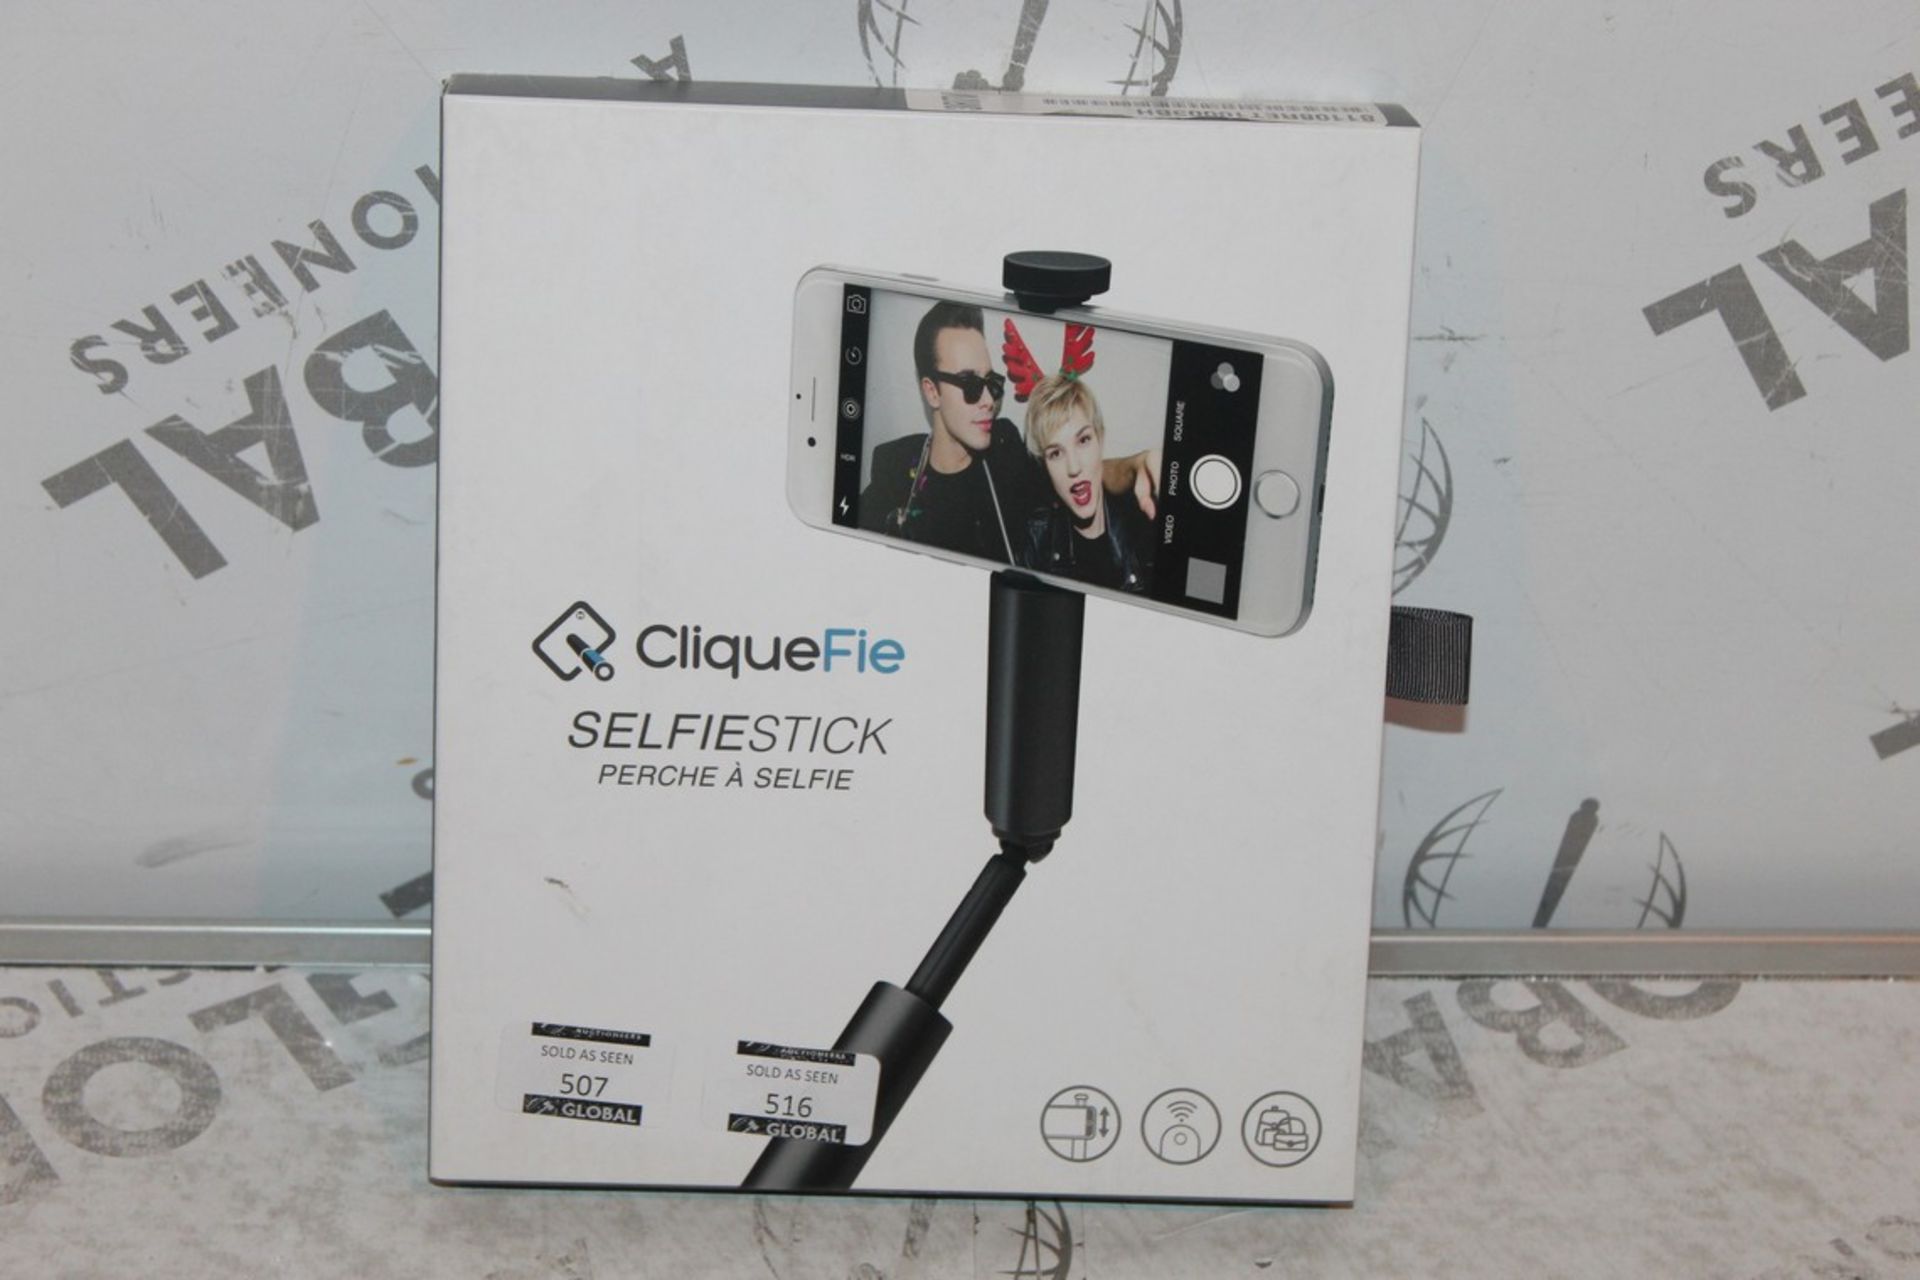 Lot to Contain 3 Boxed Cliquefie, Space Grey Selfie Sticks, Combined RRP£120.00